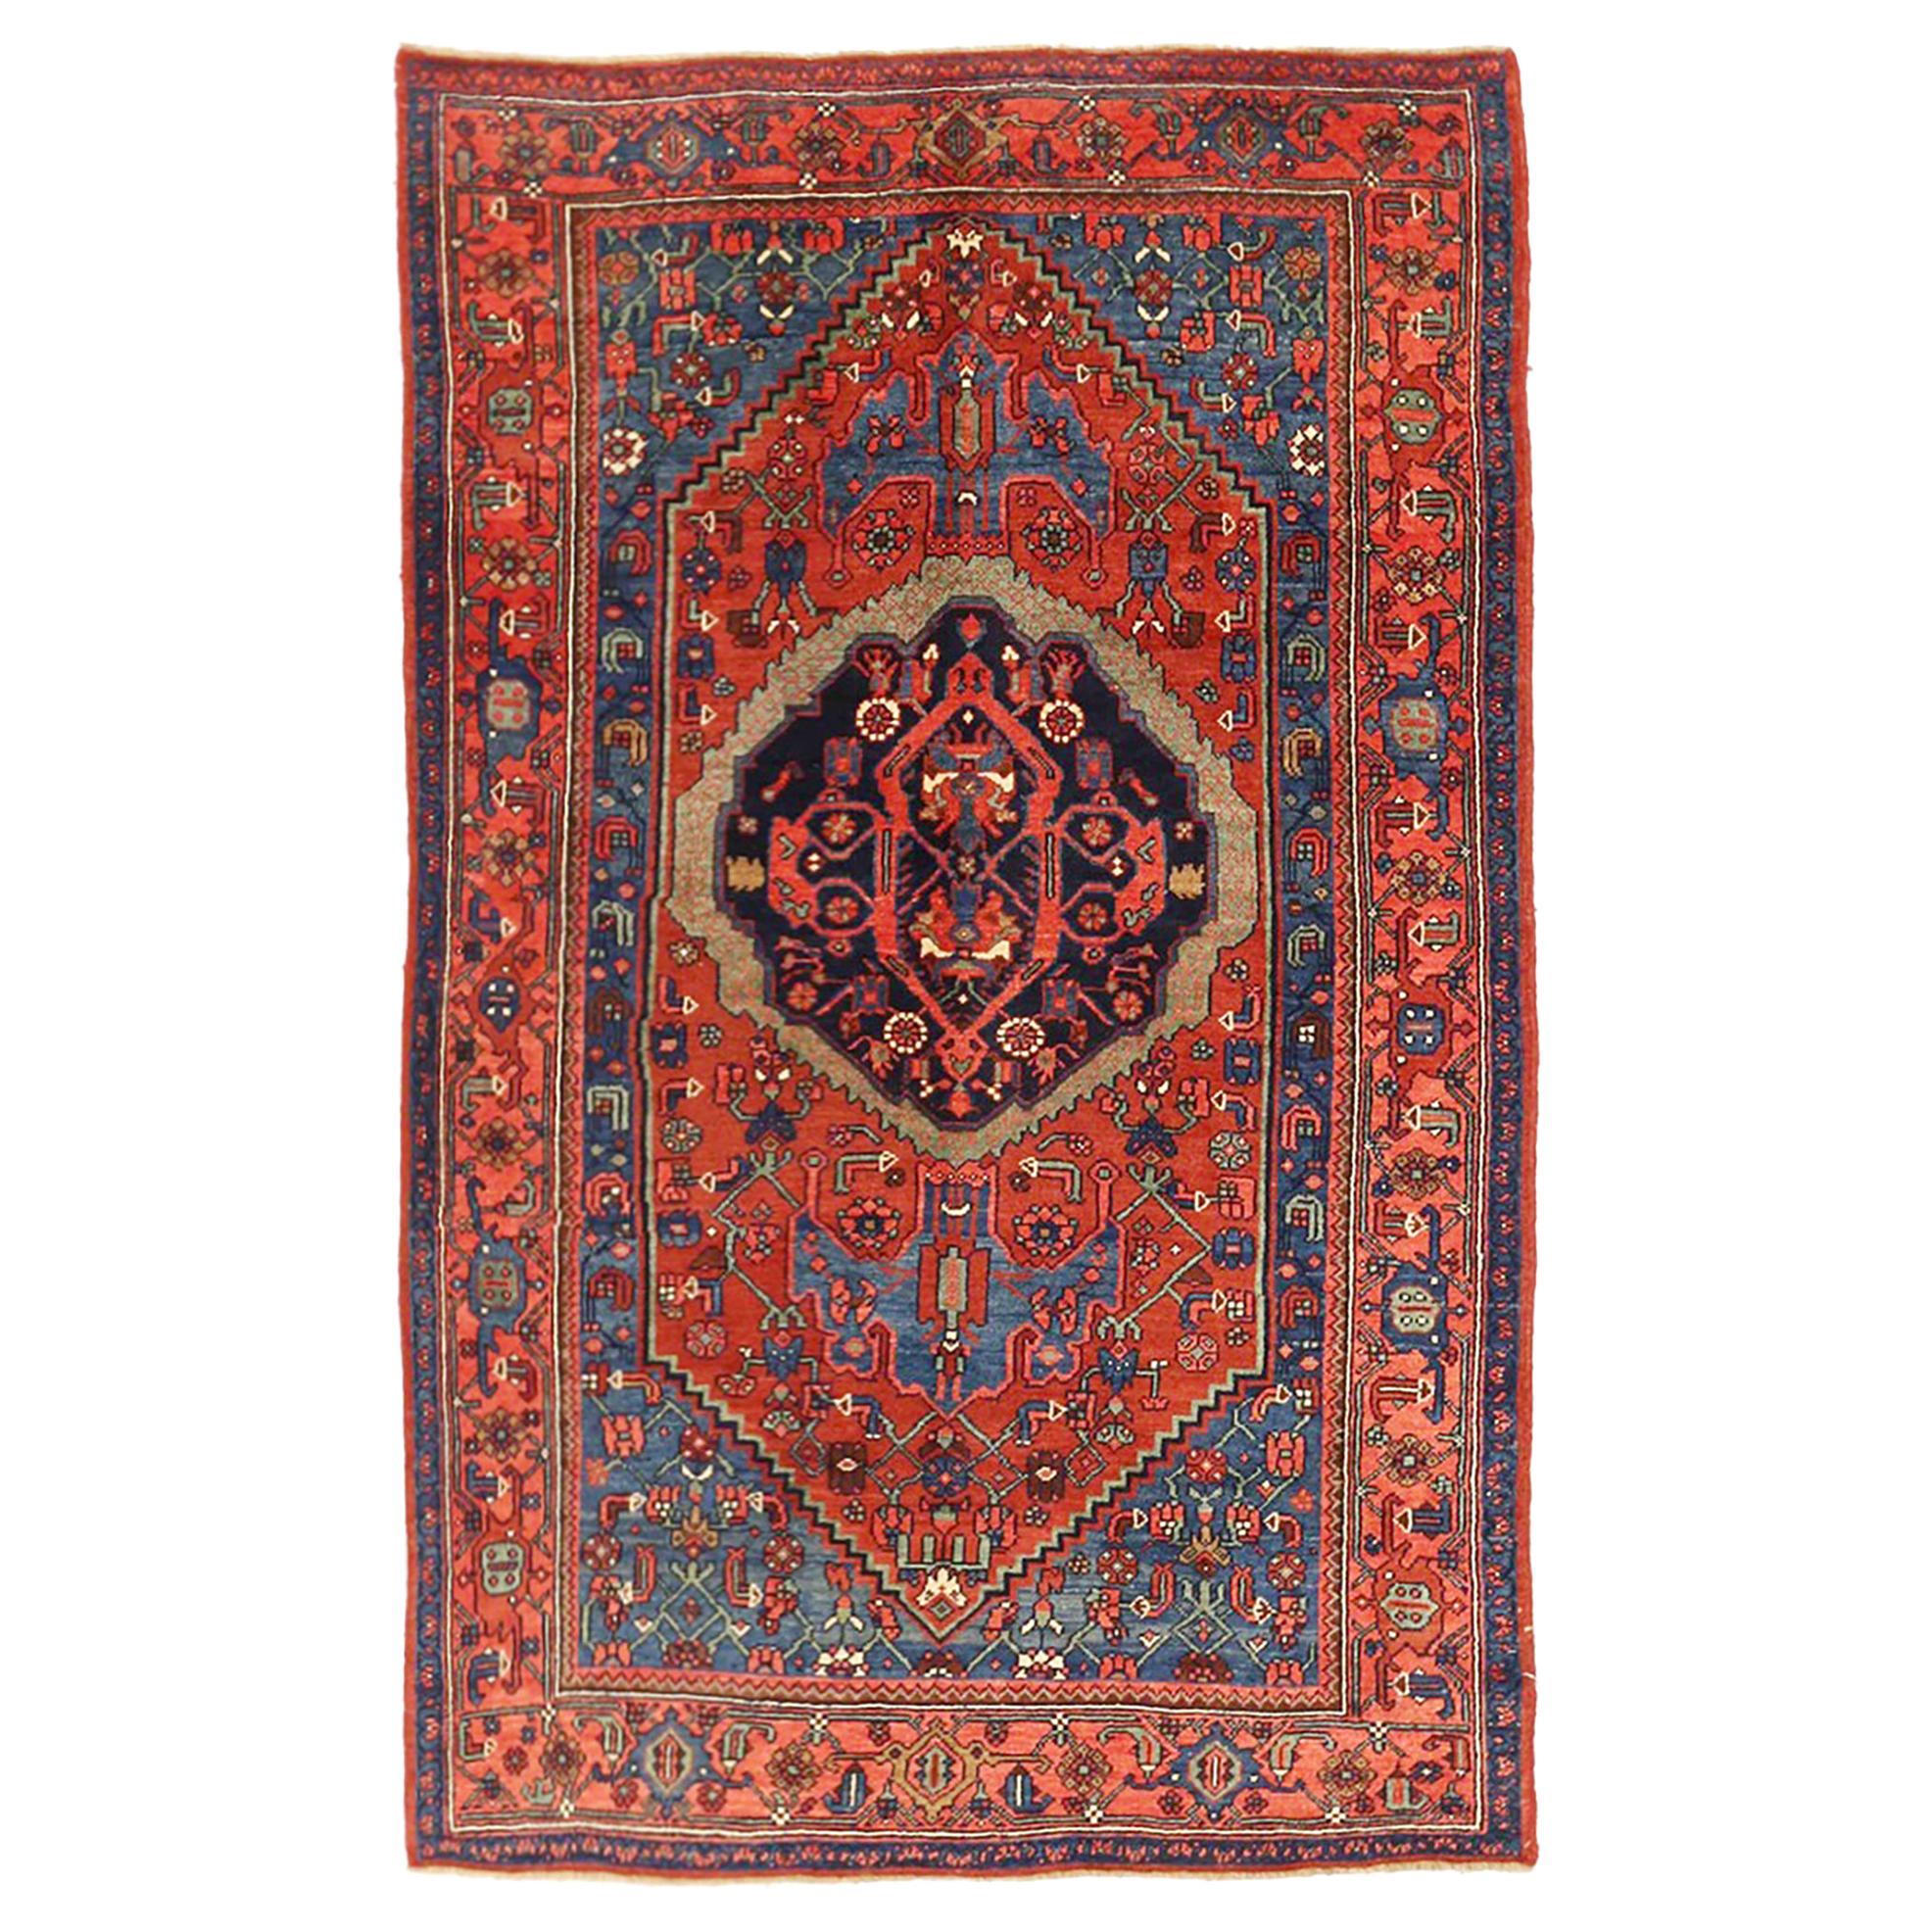 1900s Persian Bijar Rug with Large Red Floral Medallion on Blue Field